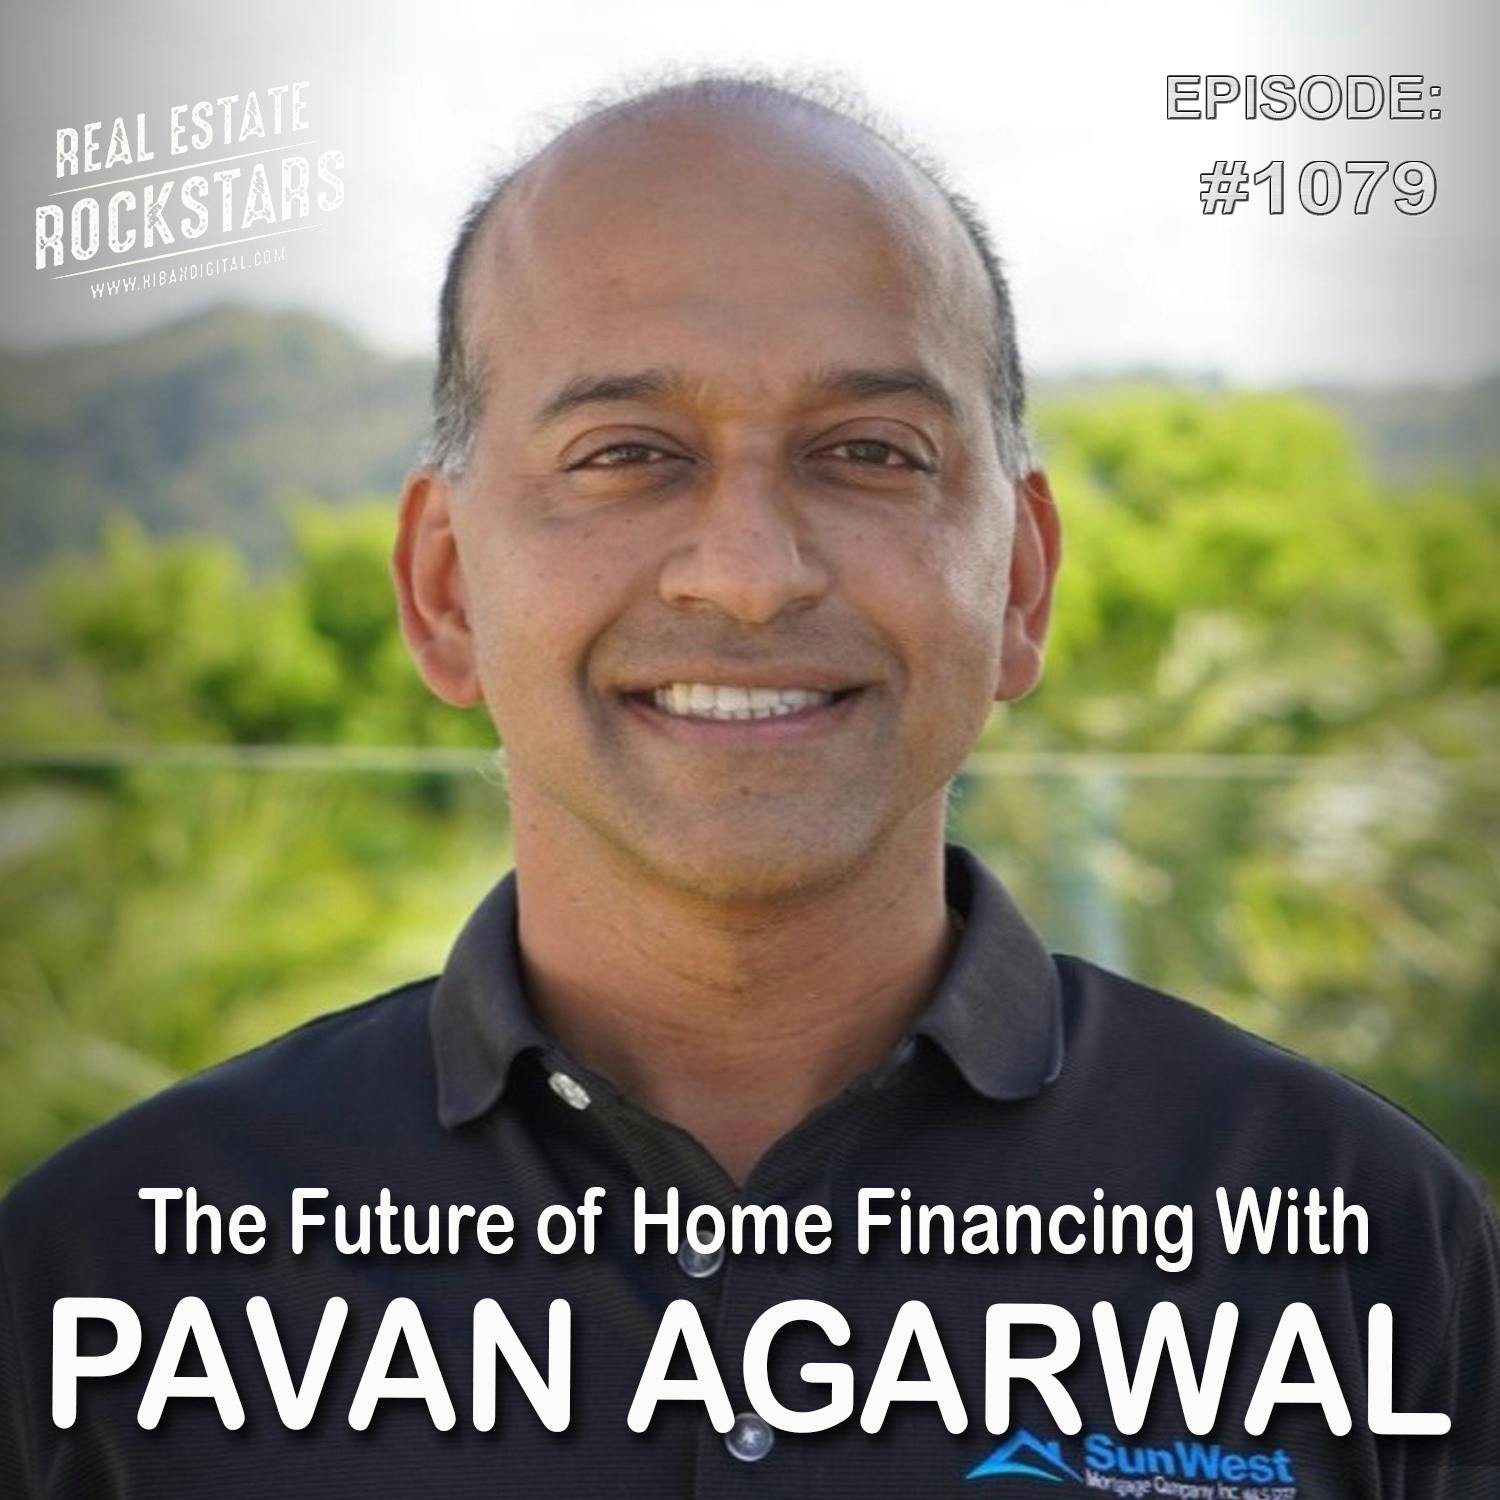 1079: The Future of Home Financing With Pavan Agarwal